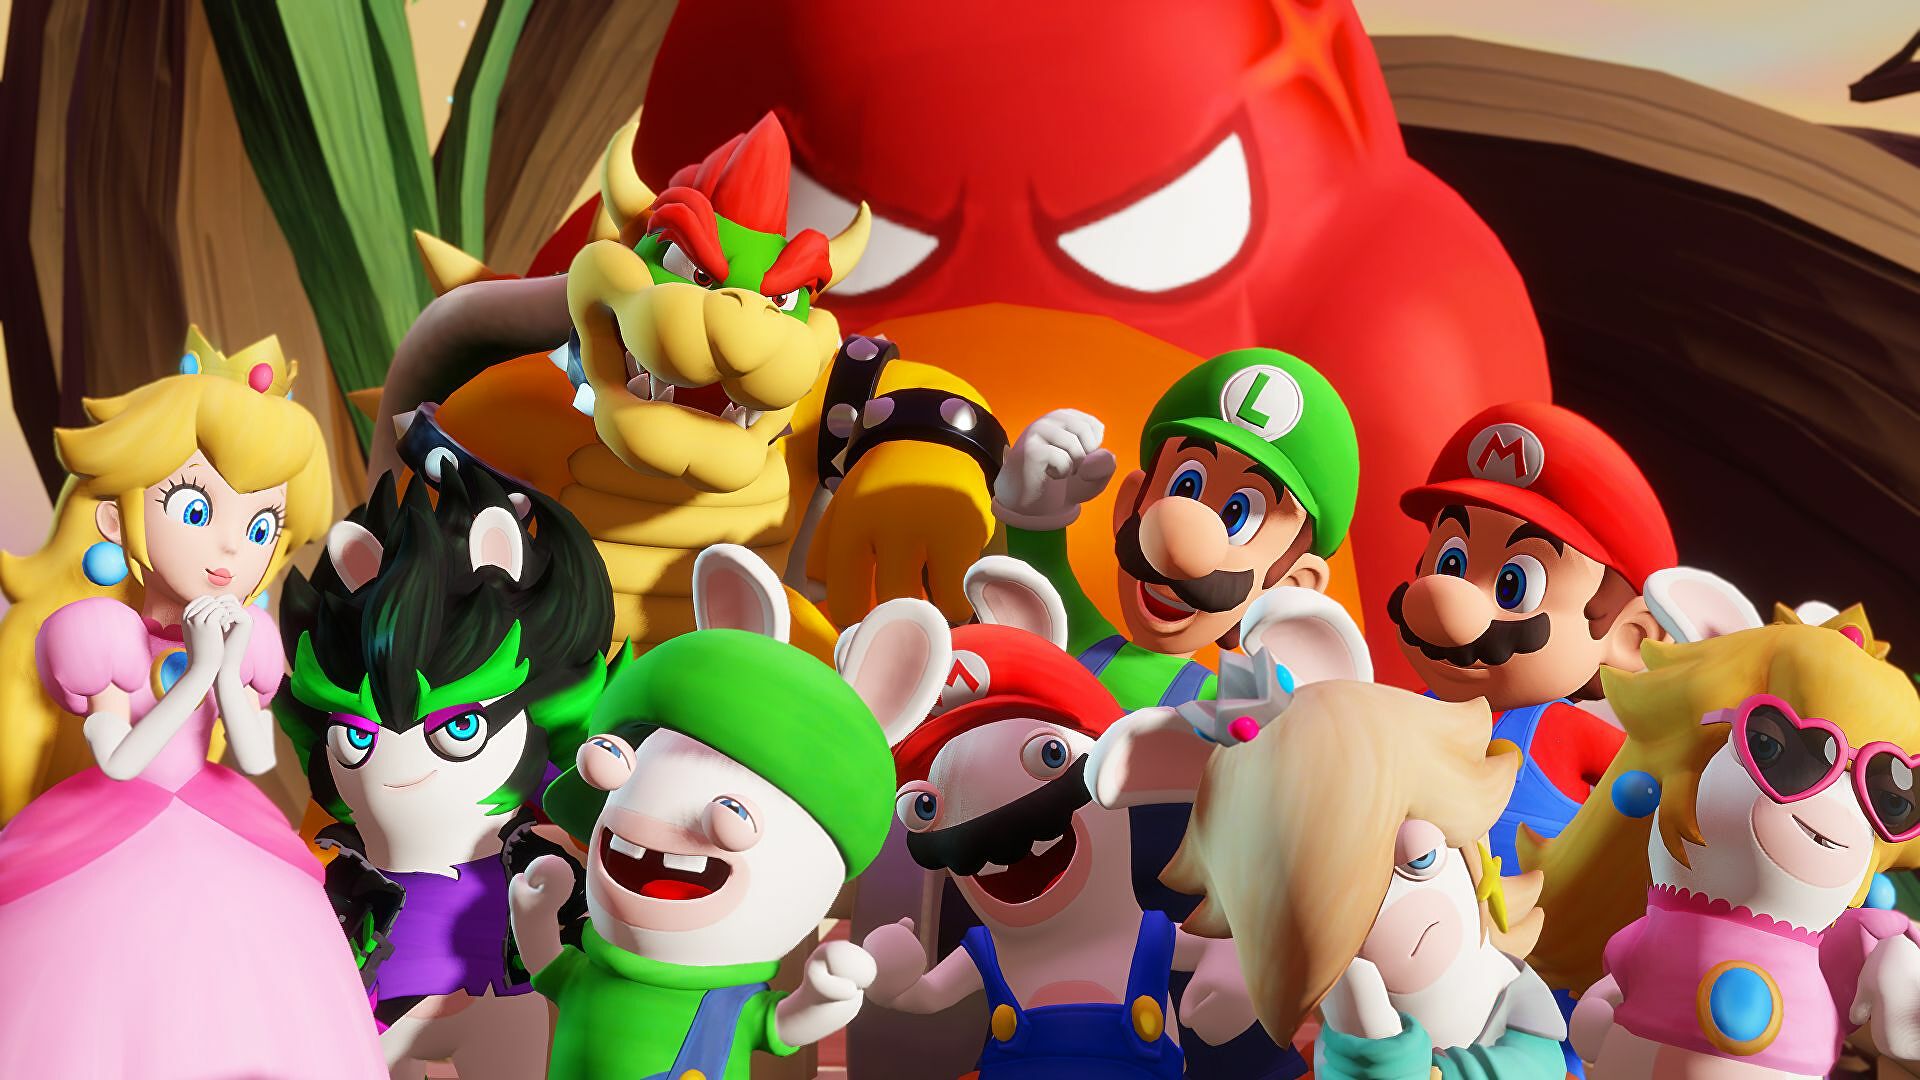 Rayman will join Mario + Rabbids Sparks of Hope as part of the game’s third DLC